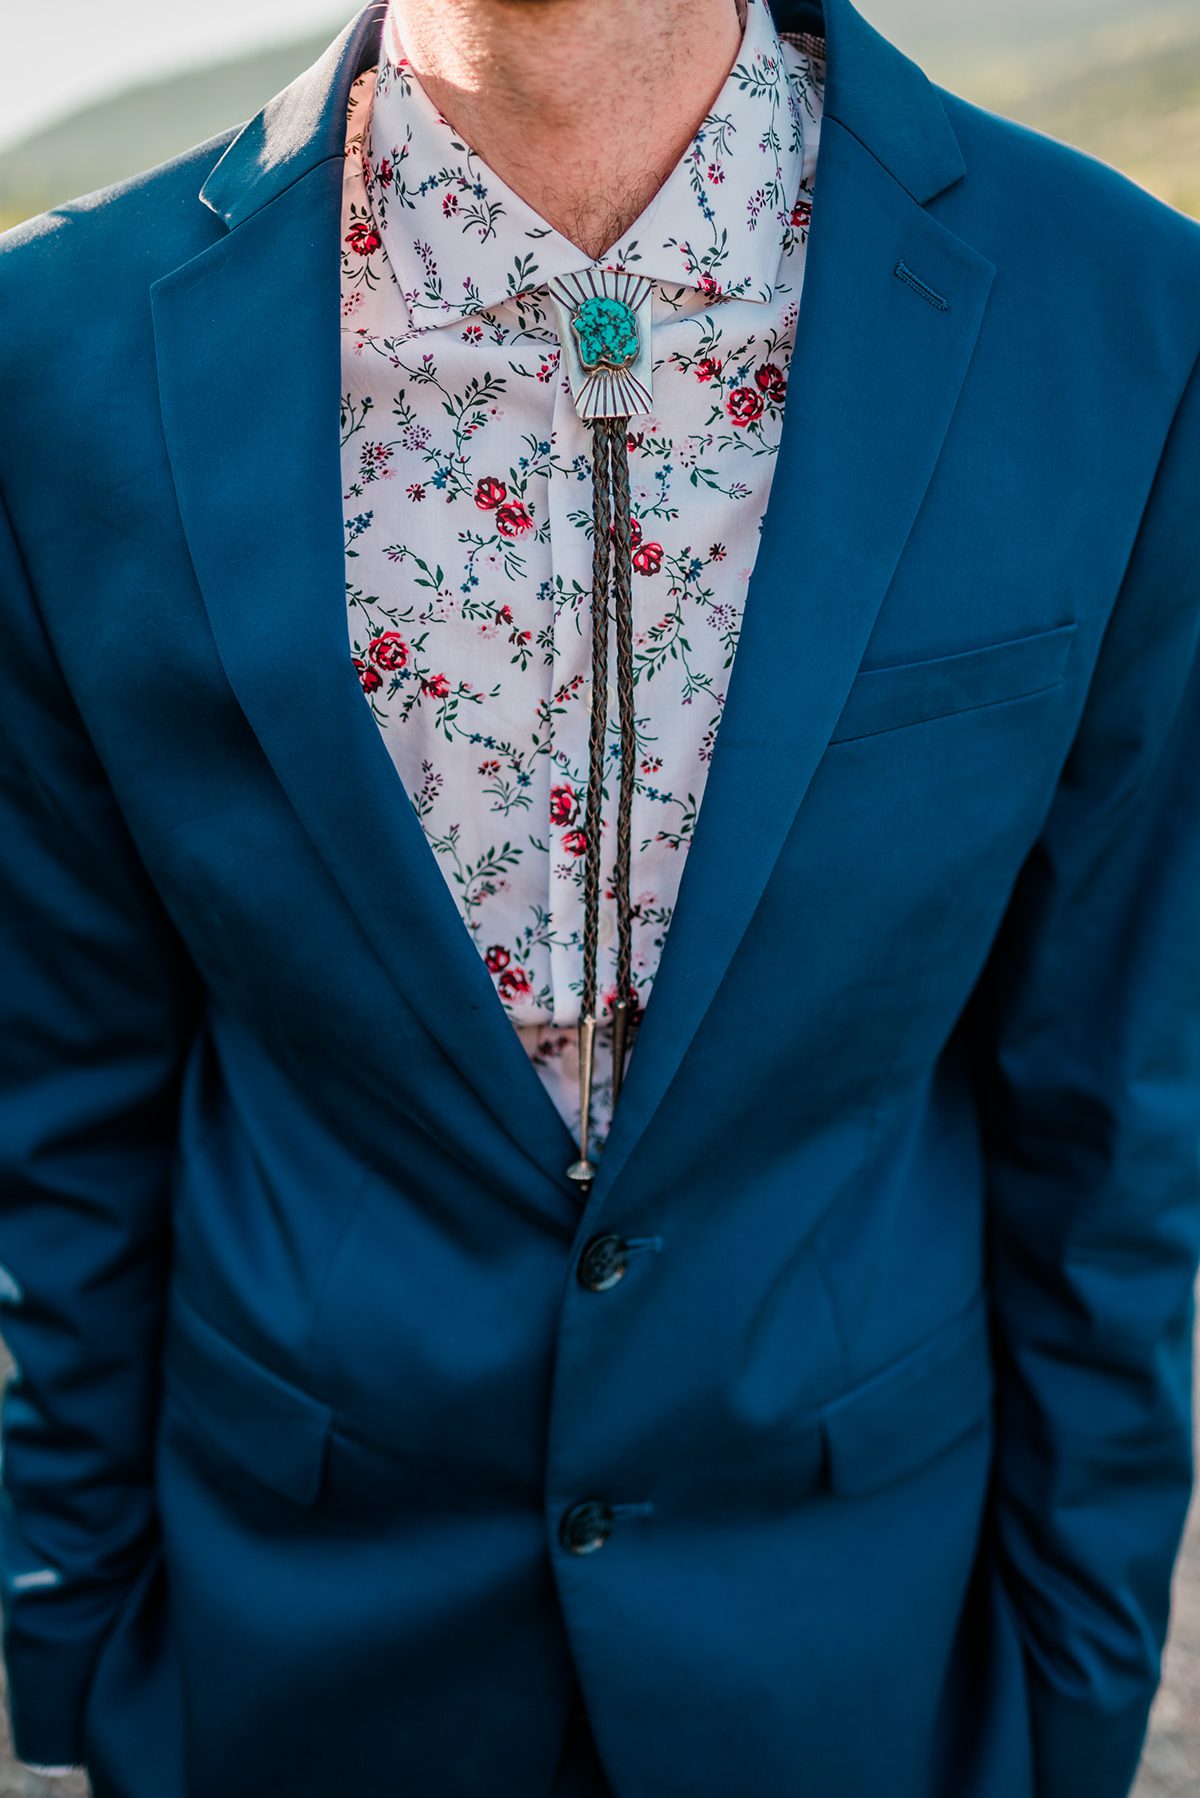 Groom wearing patterned shirt with bolo tie